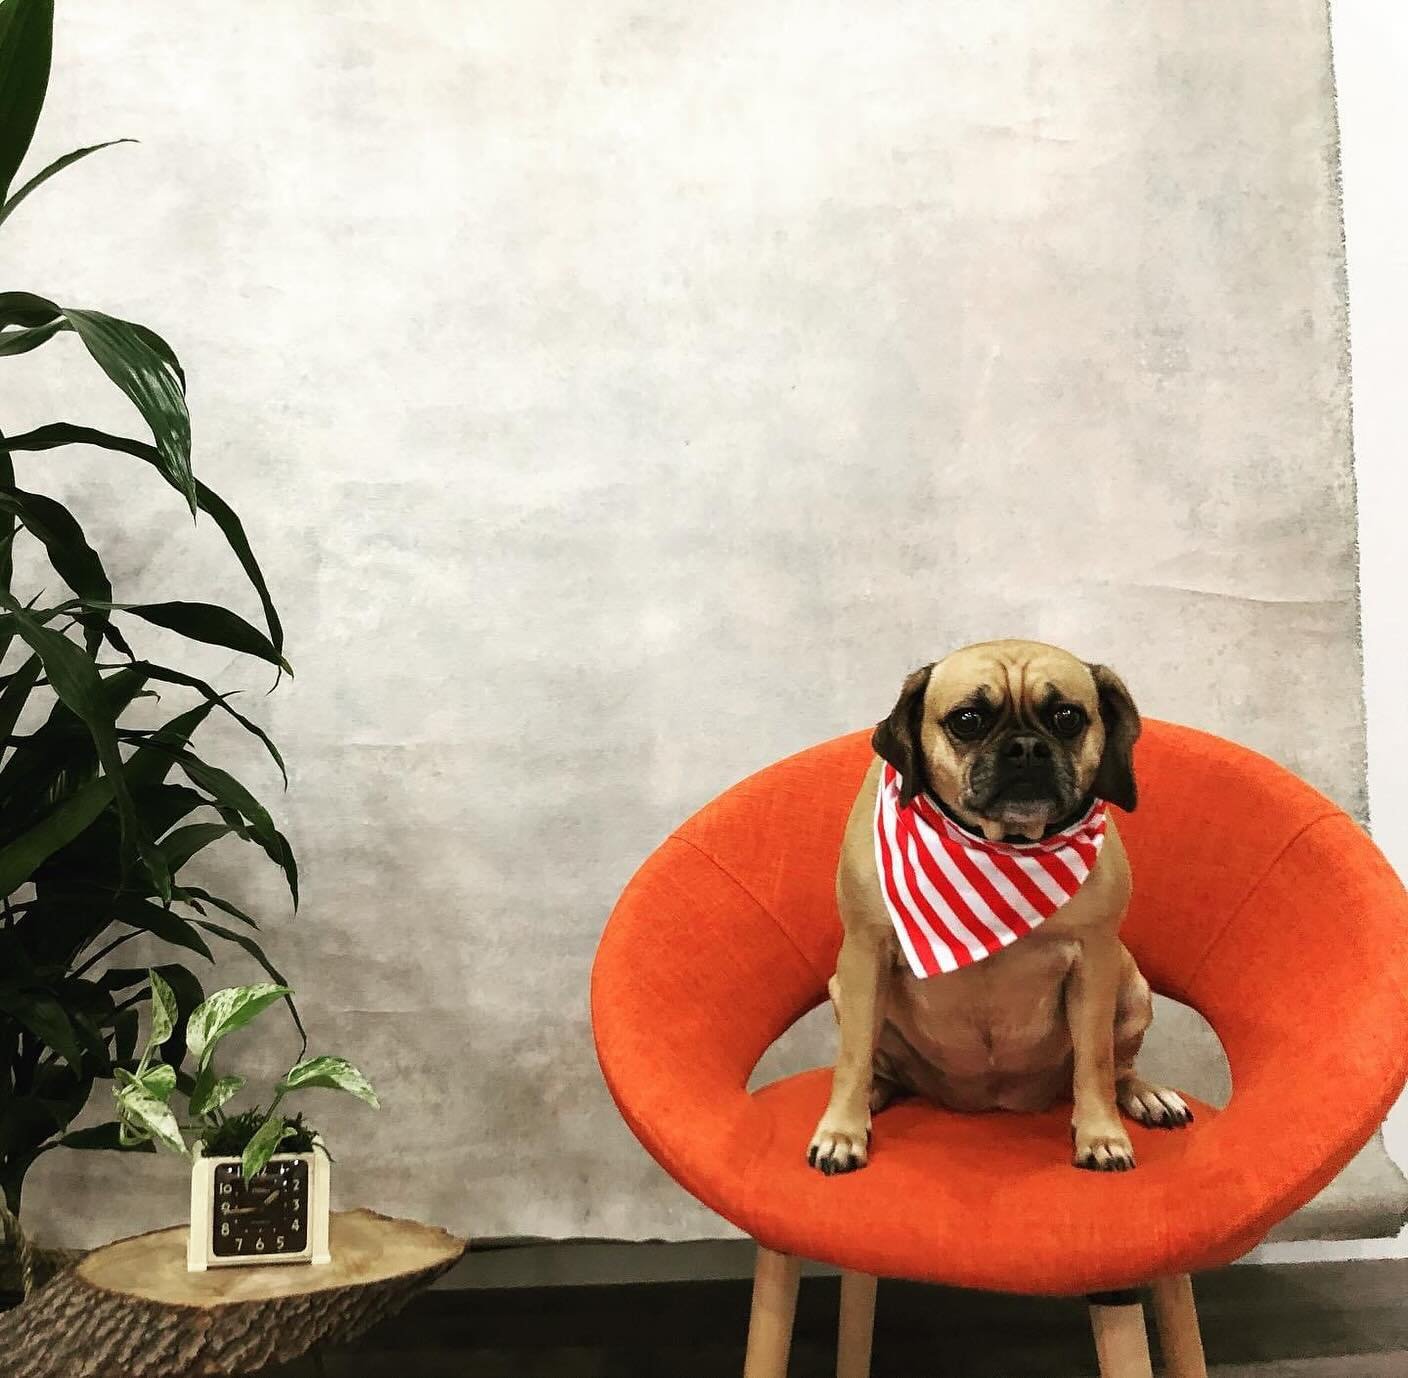 We are a pet friendly photo studio. We love dogs, and it&rsquo;s always a great idea to include your fur babies! 🐶 

However, bringing a pet means there may be a few extra details to pin down while preparing for your photo shoot, we can work with yo